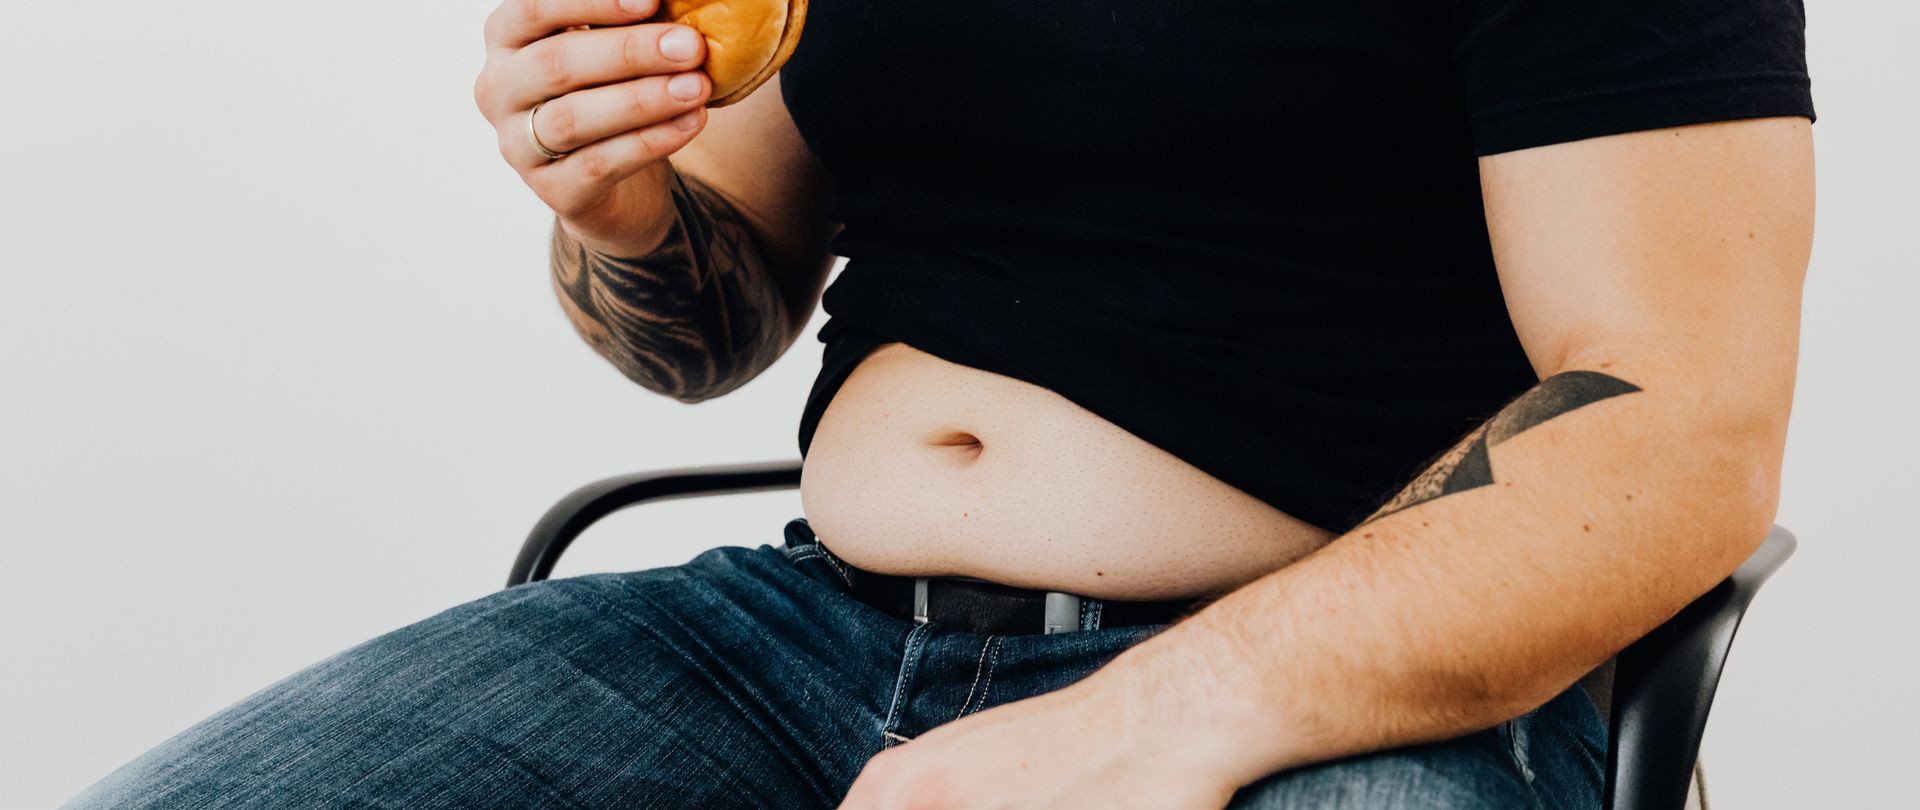 man with cheeseburger showing belly